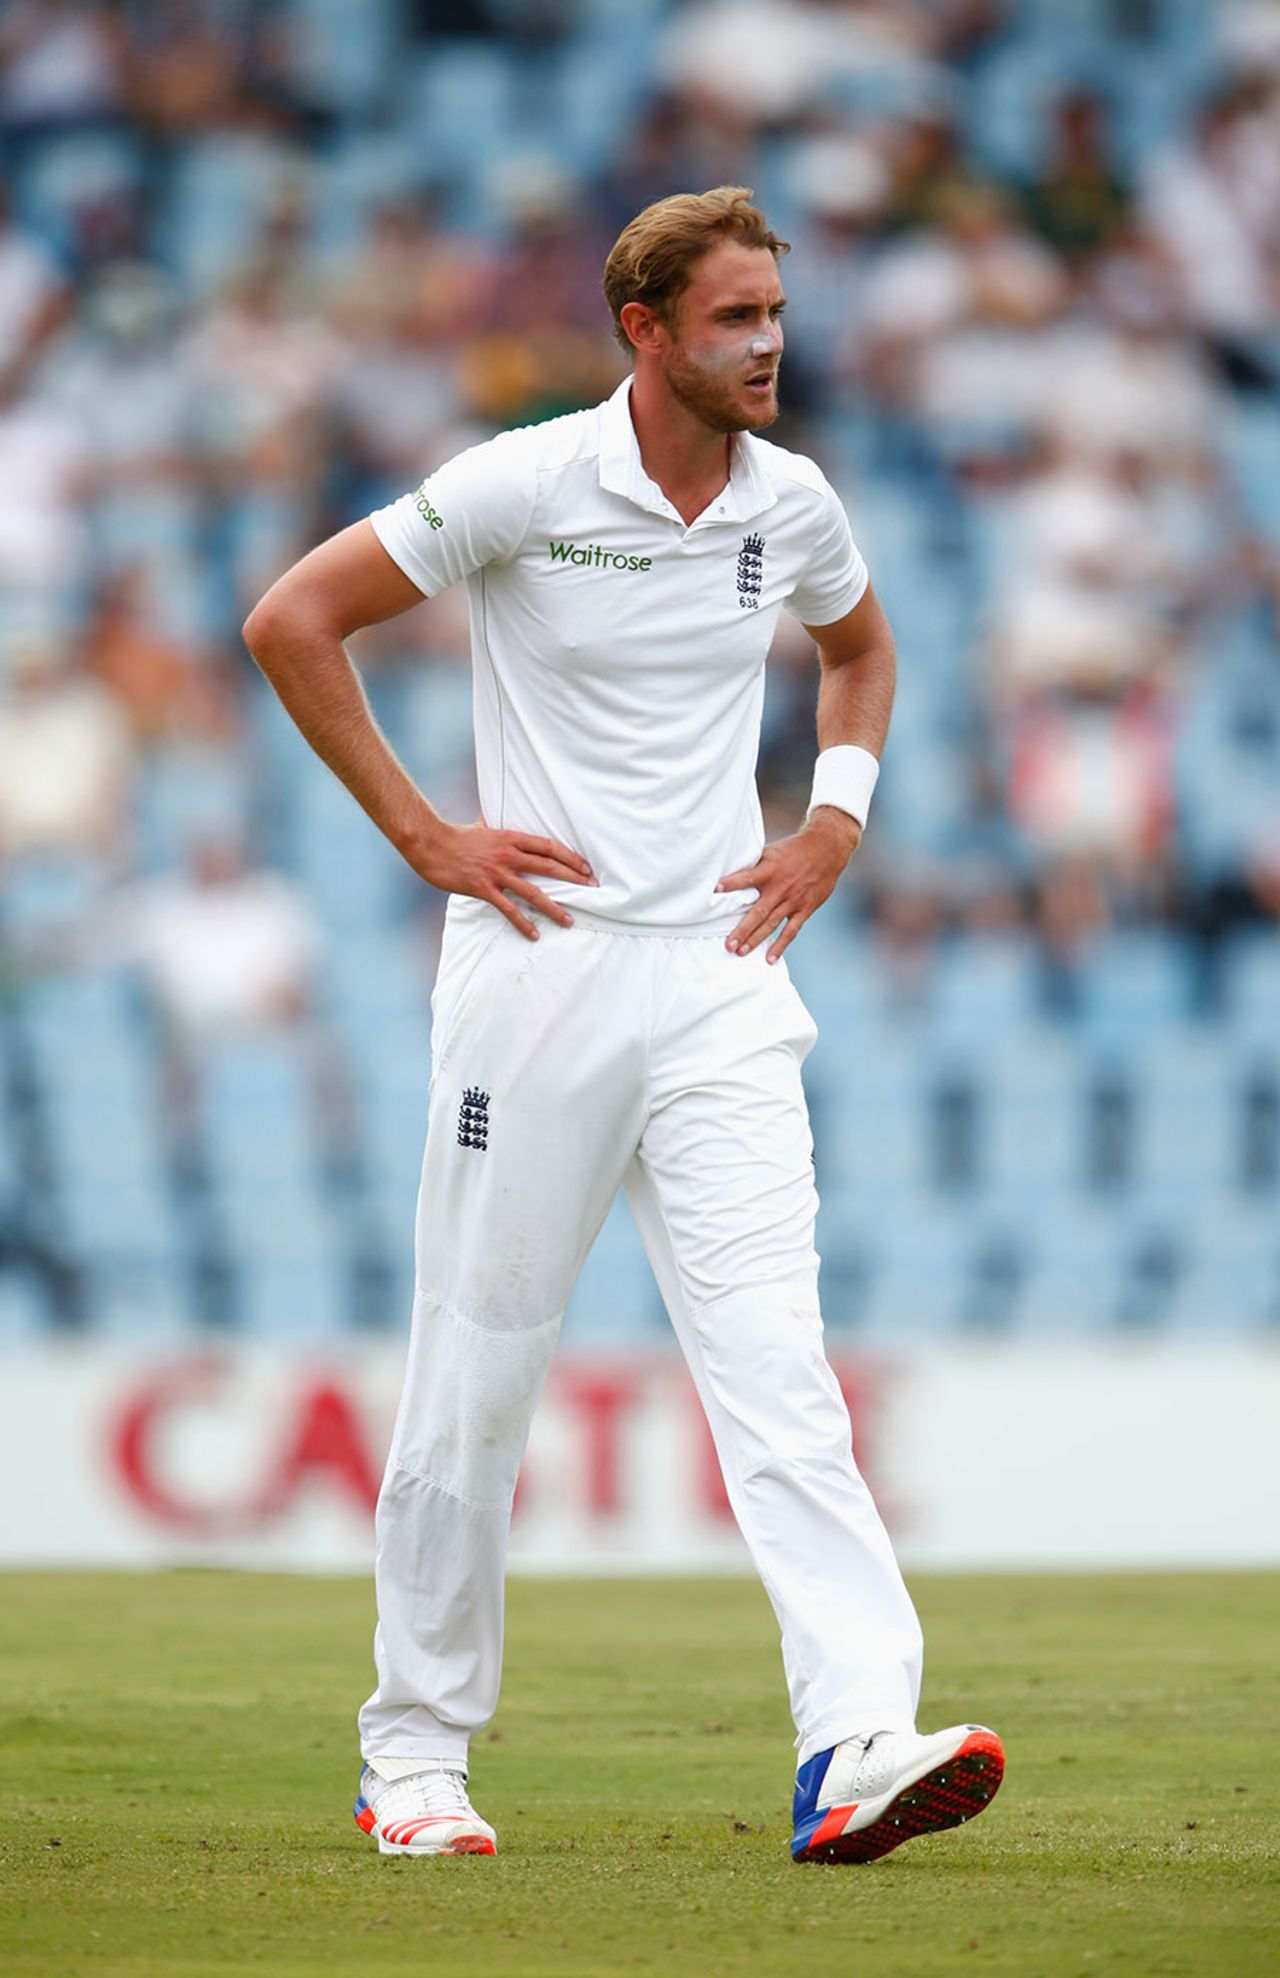 After his rampage at the Wanderers, Stuart Broad found the going tougher at Centurion, South Africa v England, 4th Test, Centurion, 1st day, January 22, 2016